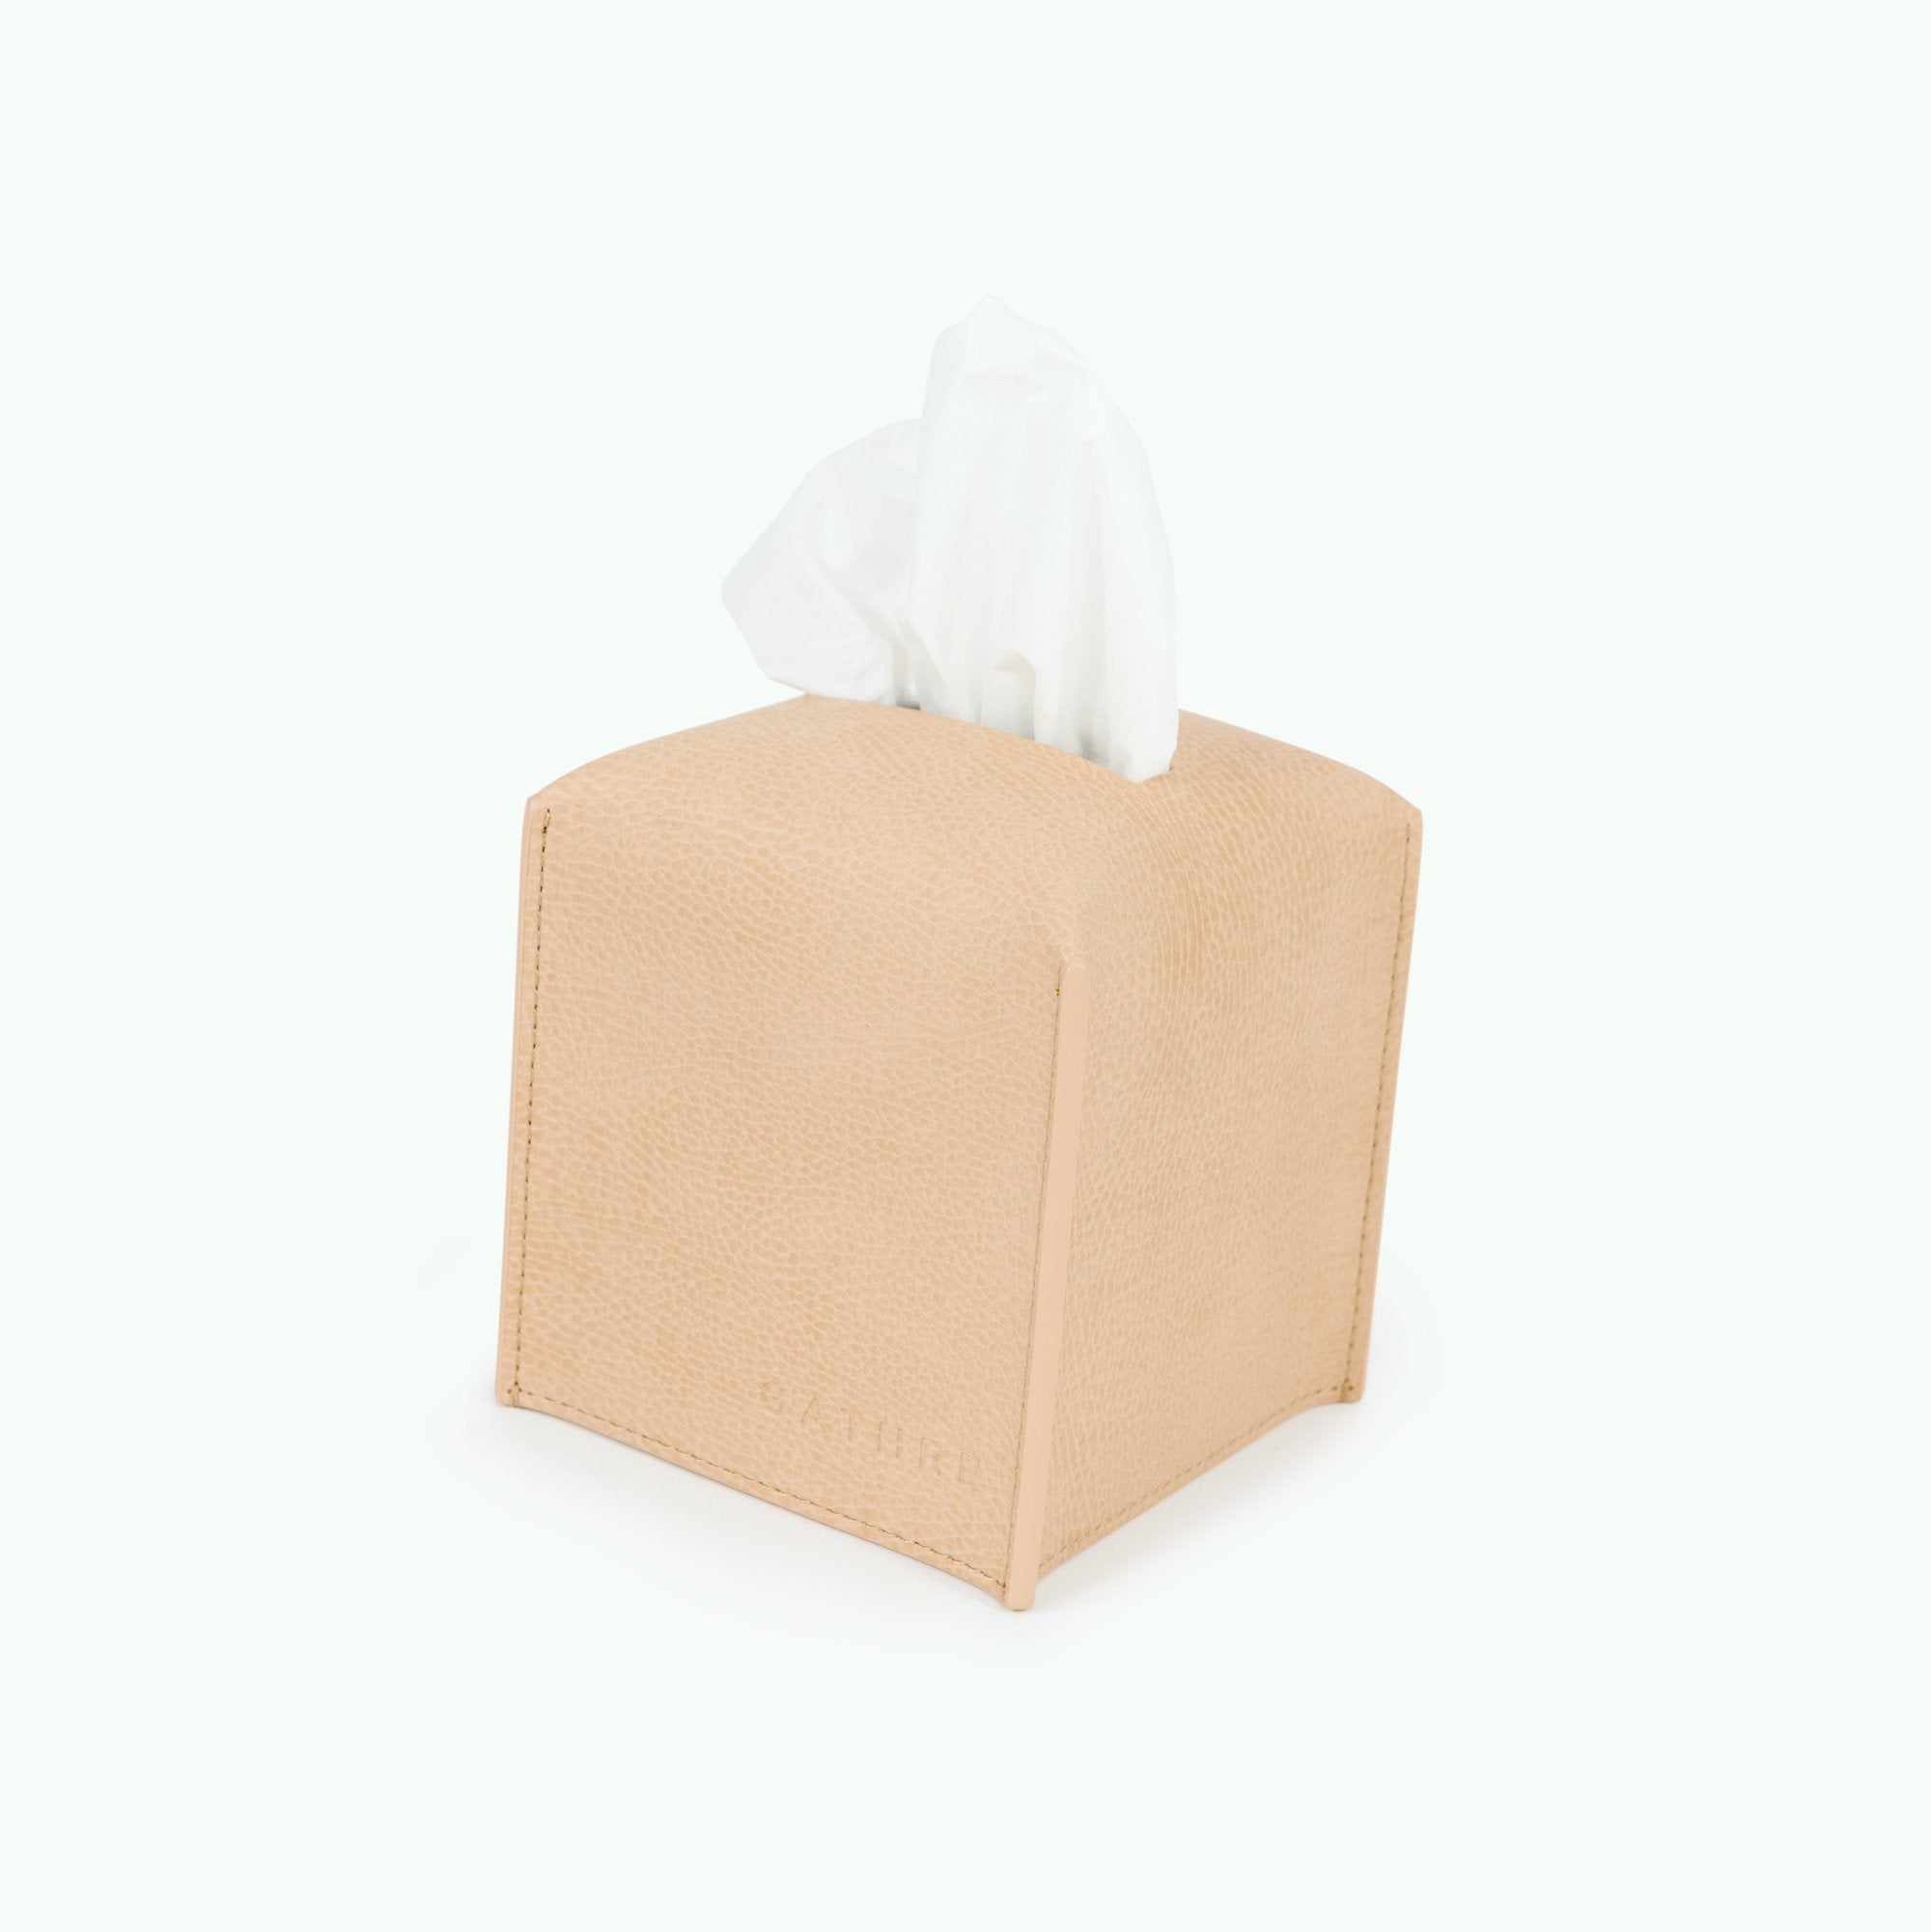 Untanned (on sale)@untanned tissue cover